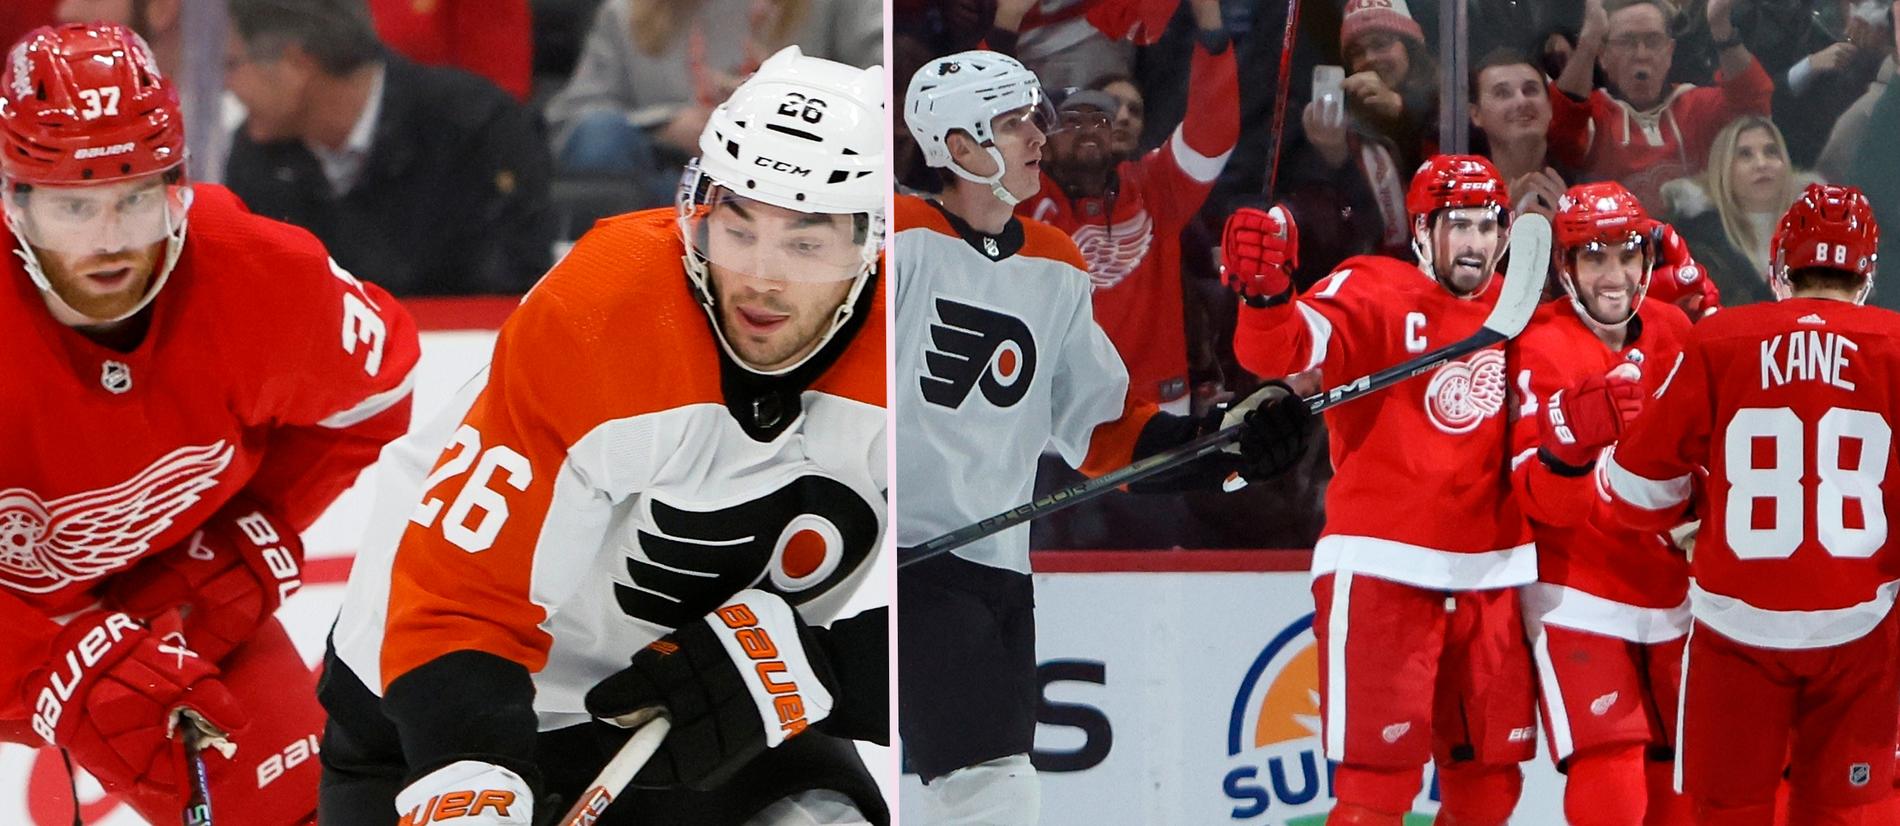 Detroit Red Wings Triumph Over Philadelphia Flyers in Thrilling Match, Patrick Kane Scores Two Goals